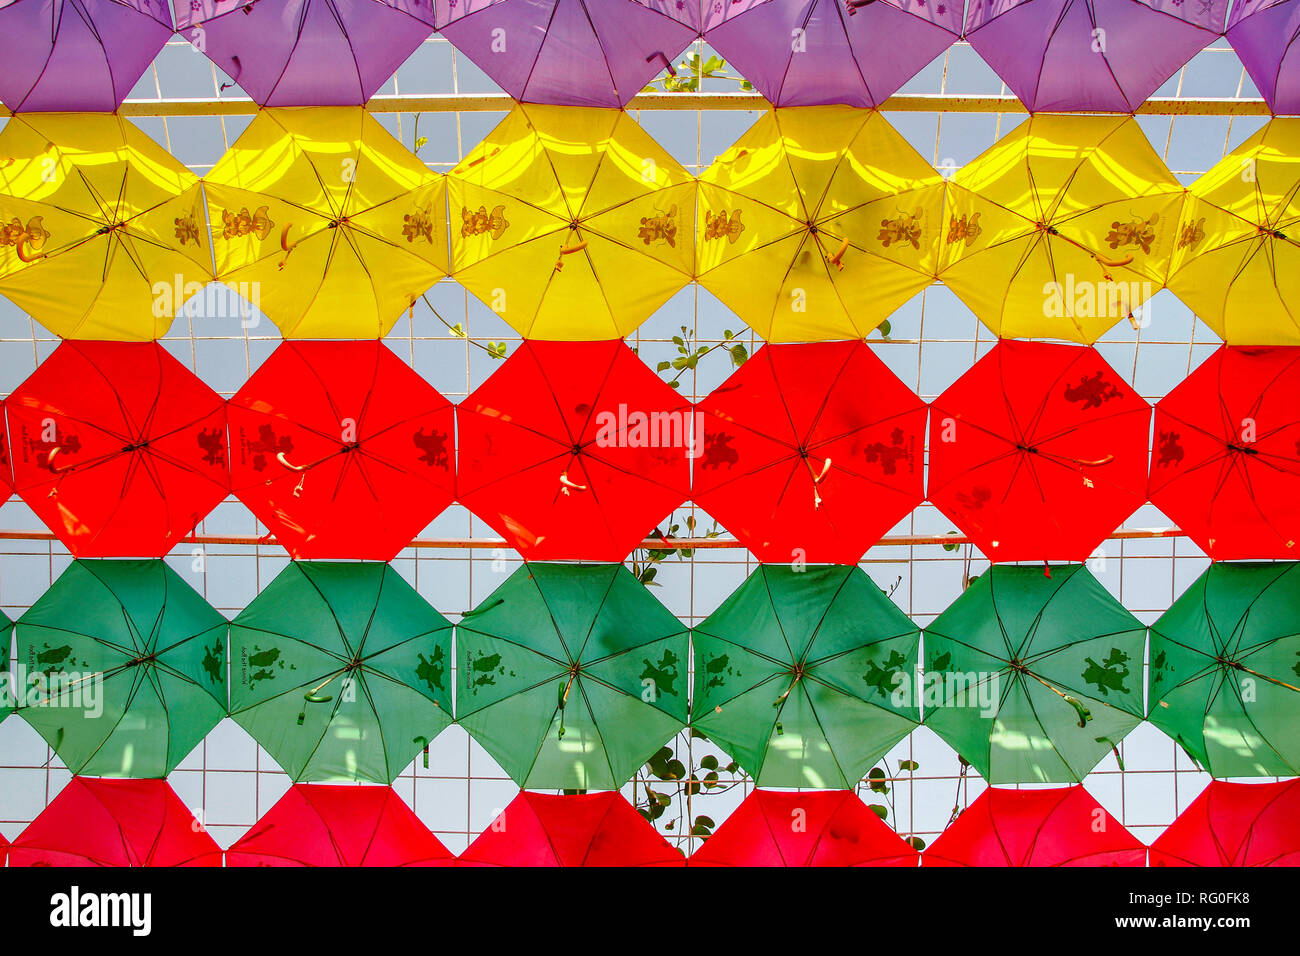 Colorful rainbow roof composition of umbrellas in yellow, red, violet and green at the Miracle Garden Dubai Stock Photo